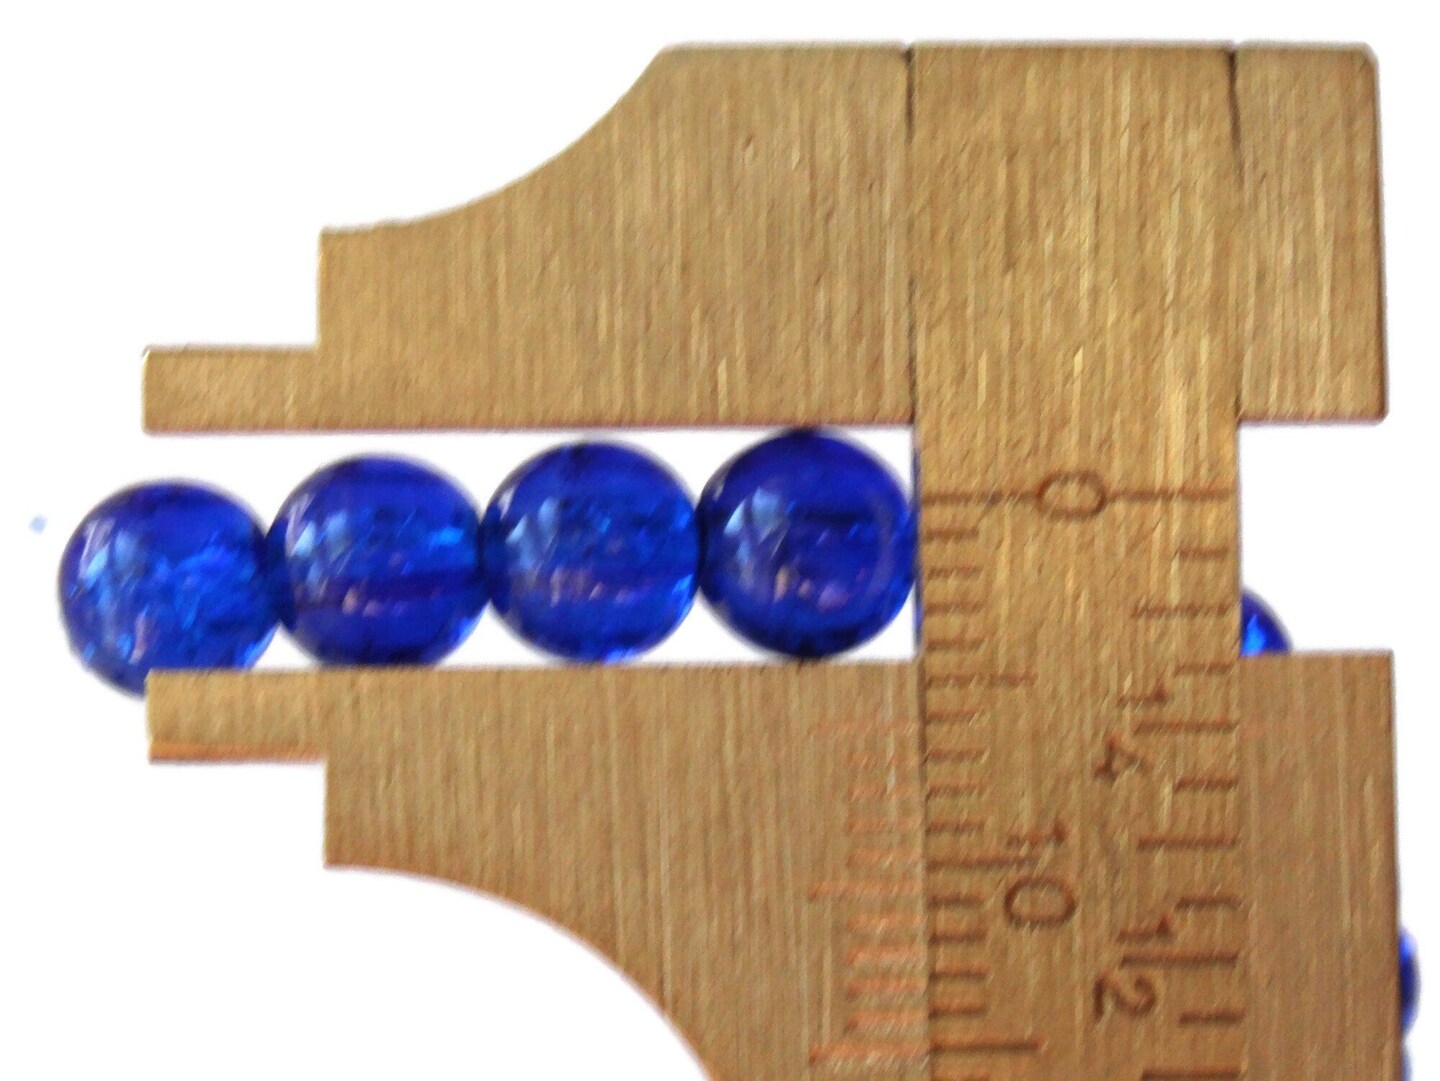 6mm Royal Blue Crackle Glass Round Beads